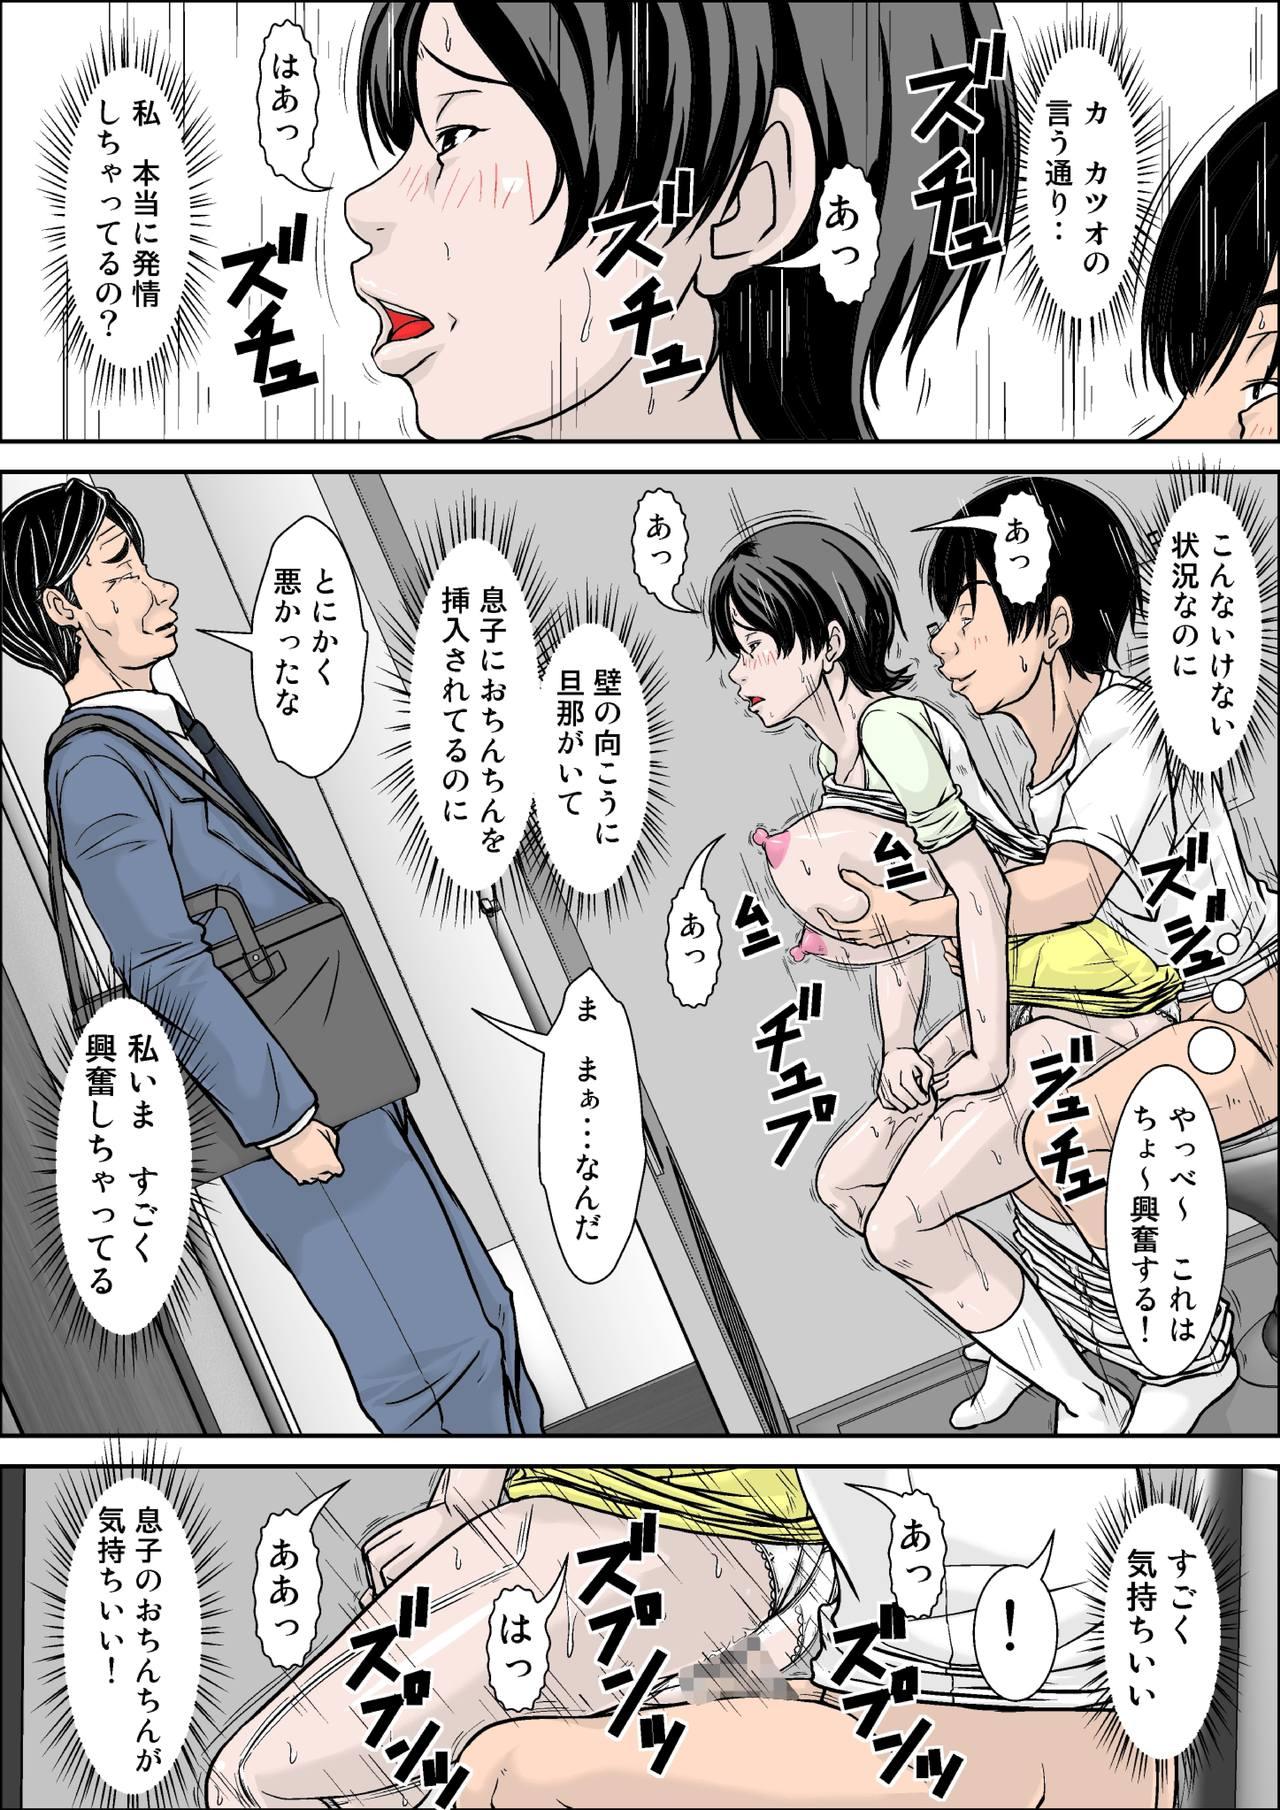 Hey! It is said that I urge you mother and will do what! ... mother Hatsujou - 1st part 32